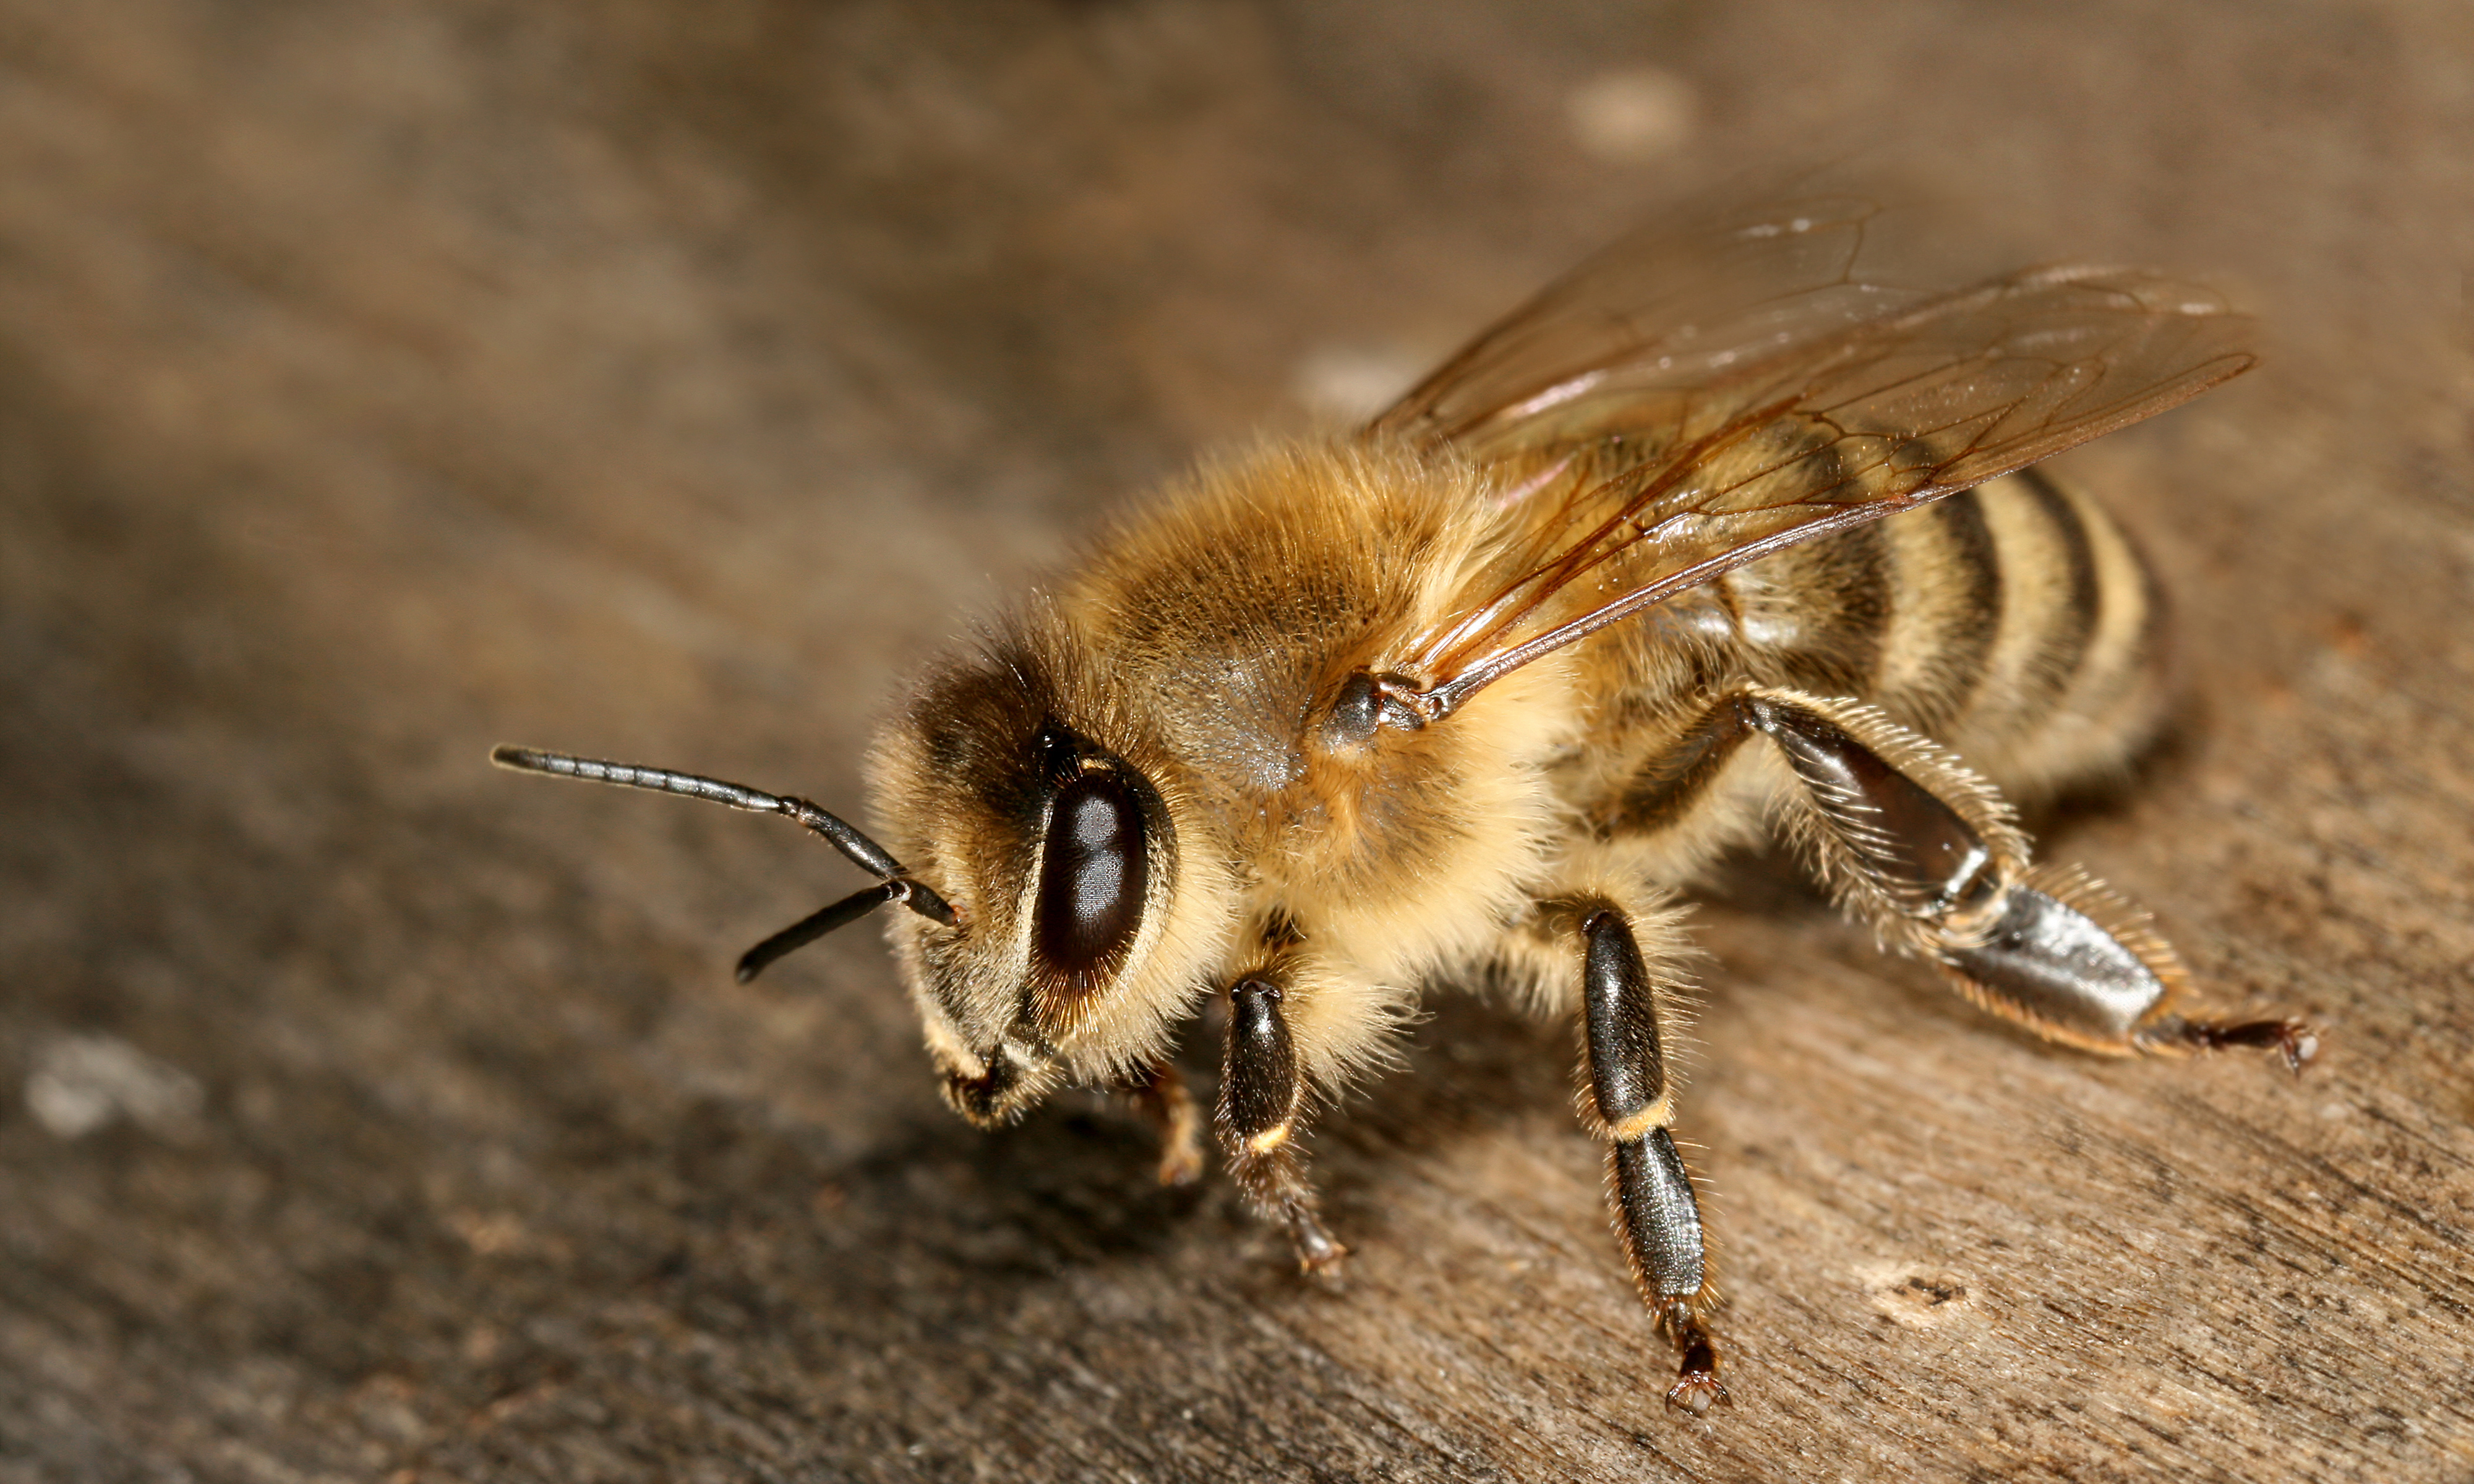 http://upload.wikimedia.org/wikipedia/commons/a/a1/Apis_mellifera_carnica_worker_hive_entrance_3.jpg